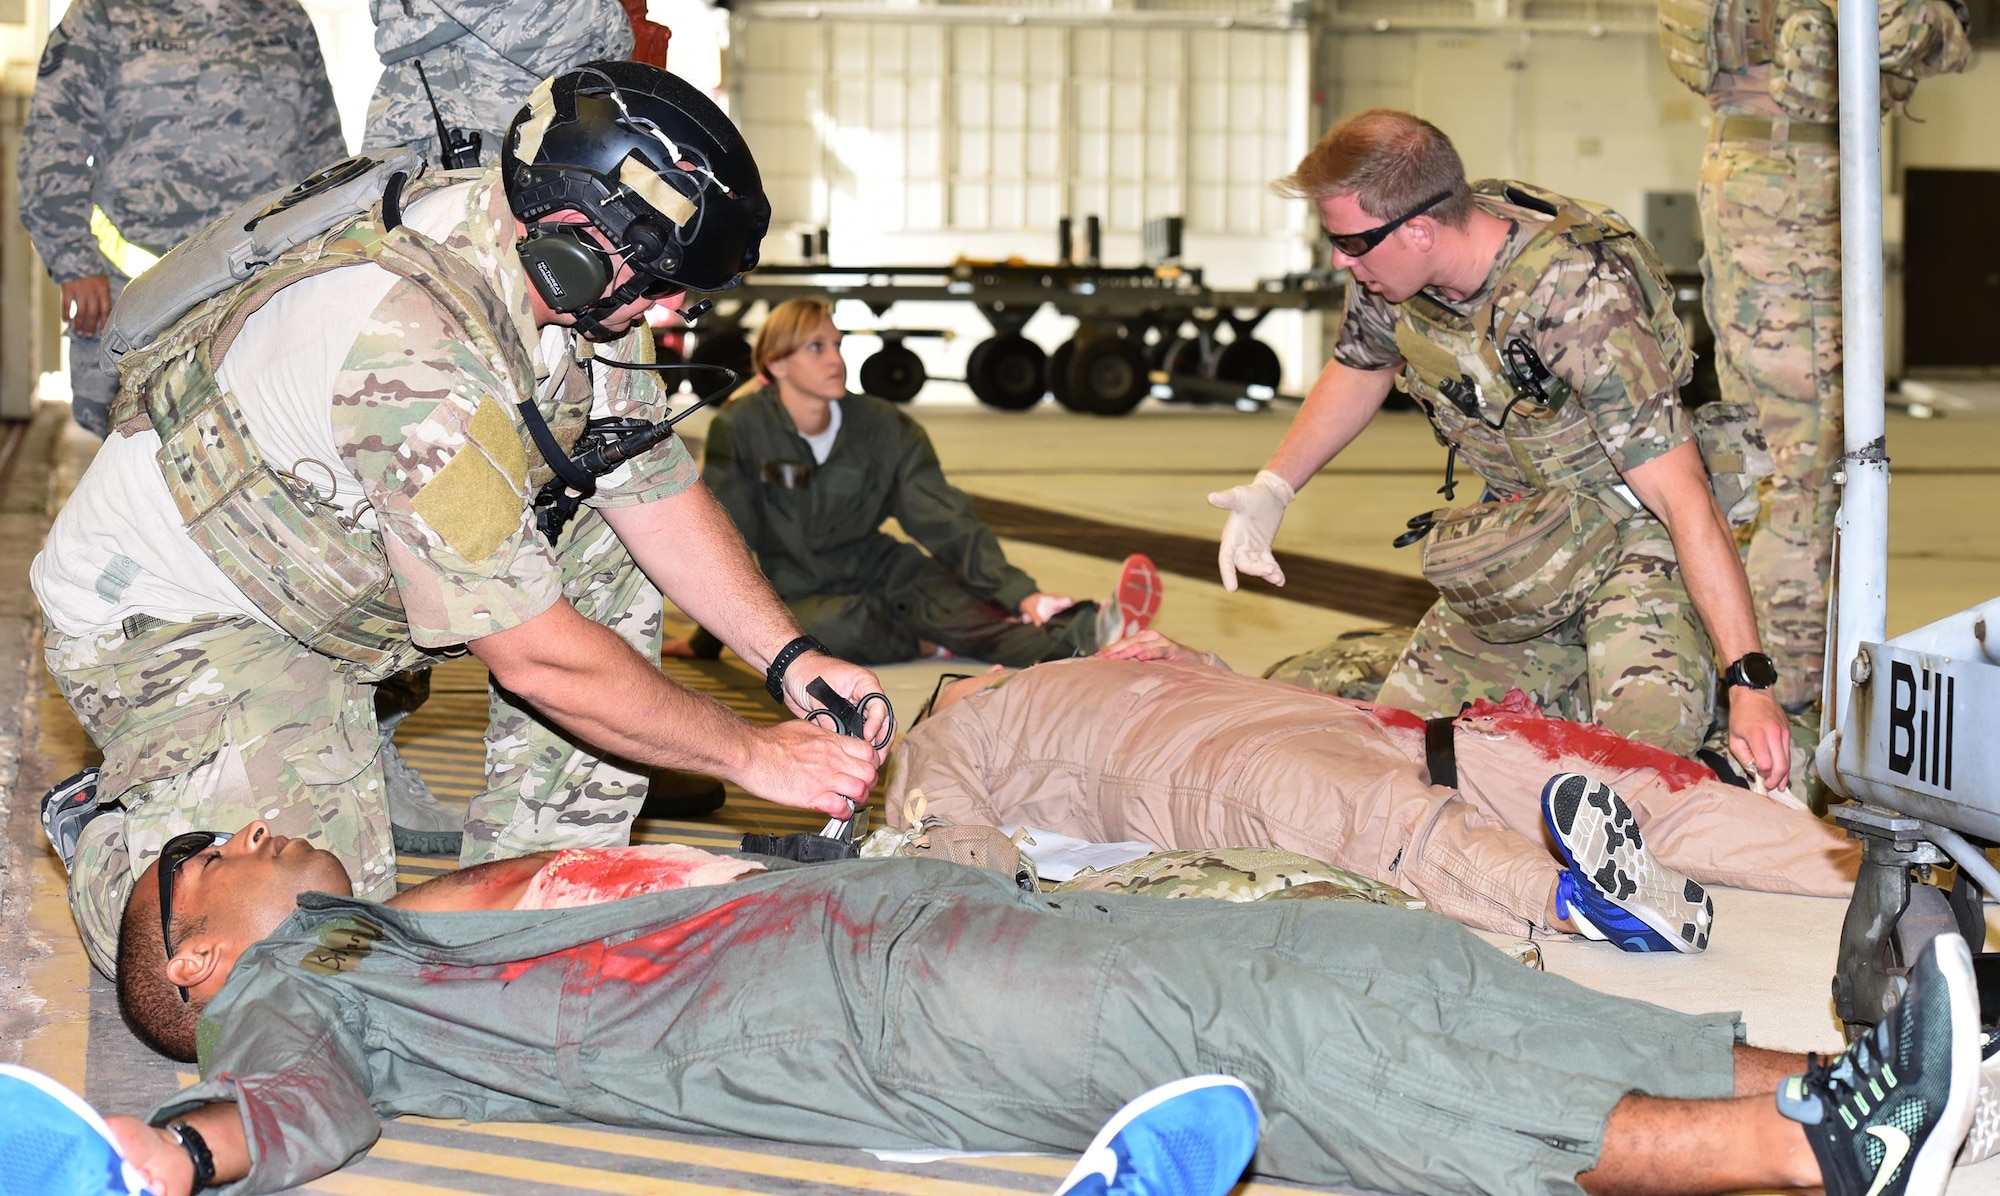 Master Sgt. Louis Hause, left, and Staff Sgt. Lucus Vannorsdall, right, 308th Rescue Squadron pararescuemen, tend to victims of an active shooter exercise July 25, 2017 in Hangar 750. The pararescuemen were the first medics to arrive on scene, followed by the 45th Civil Engineer Squadron firefighters who took command of the scene. The first responders worked side-by-side to attend to victims and load them into ambulances for transport to the hospital.  The exercise was a joint endeavor between the host 45th Space Wing and 920th Rescue Wing. (U.S. Air Force photo/Tech. Sgt. Lindsey Maurice)